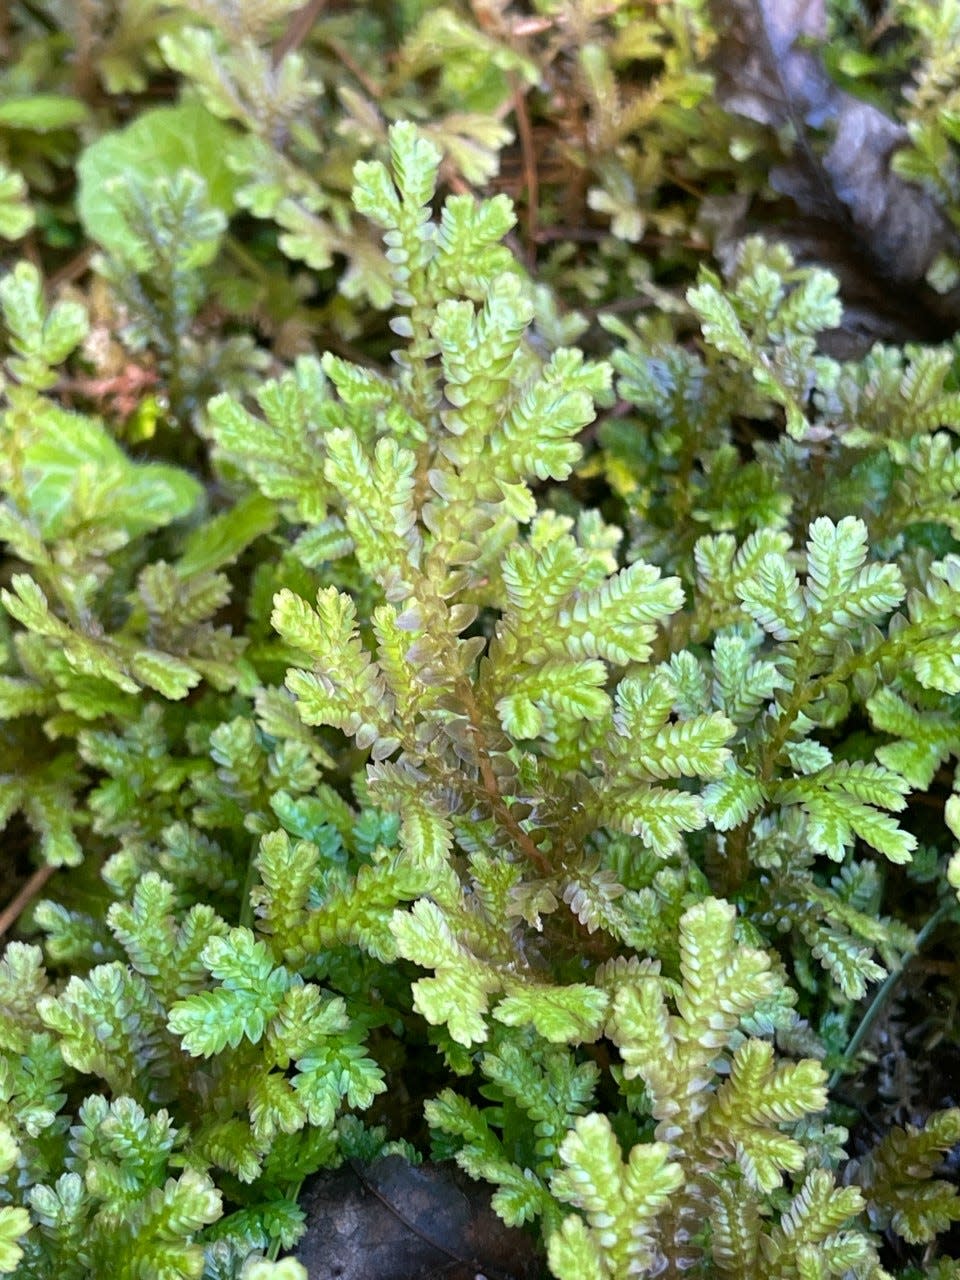 Matted spikemoss is related to various kinds of fern-like plants called “clubmosses.” Like ferns, they reproduce from spores.